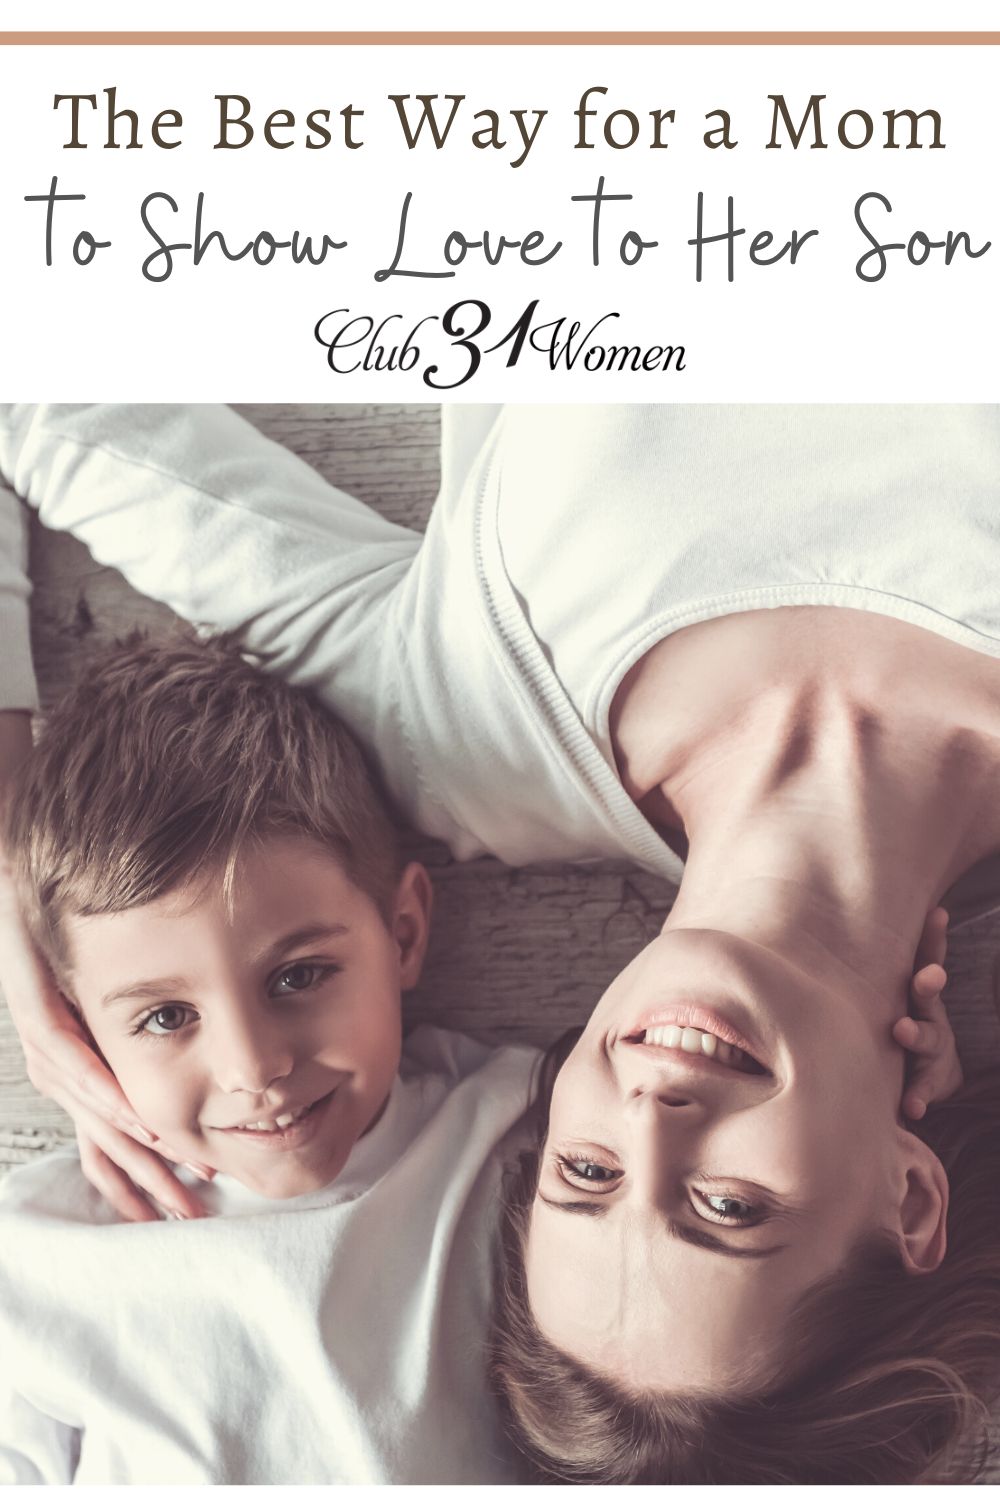 What would you say was the best thing I did for you? That's the question I asked our son as he was leaving for college. His answer rather surprised me.... via @Club31Women